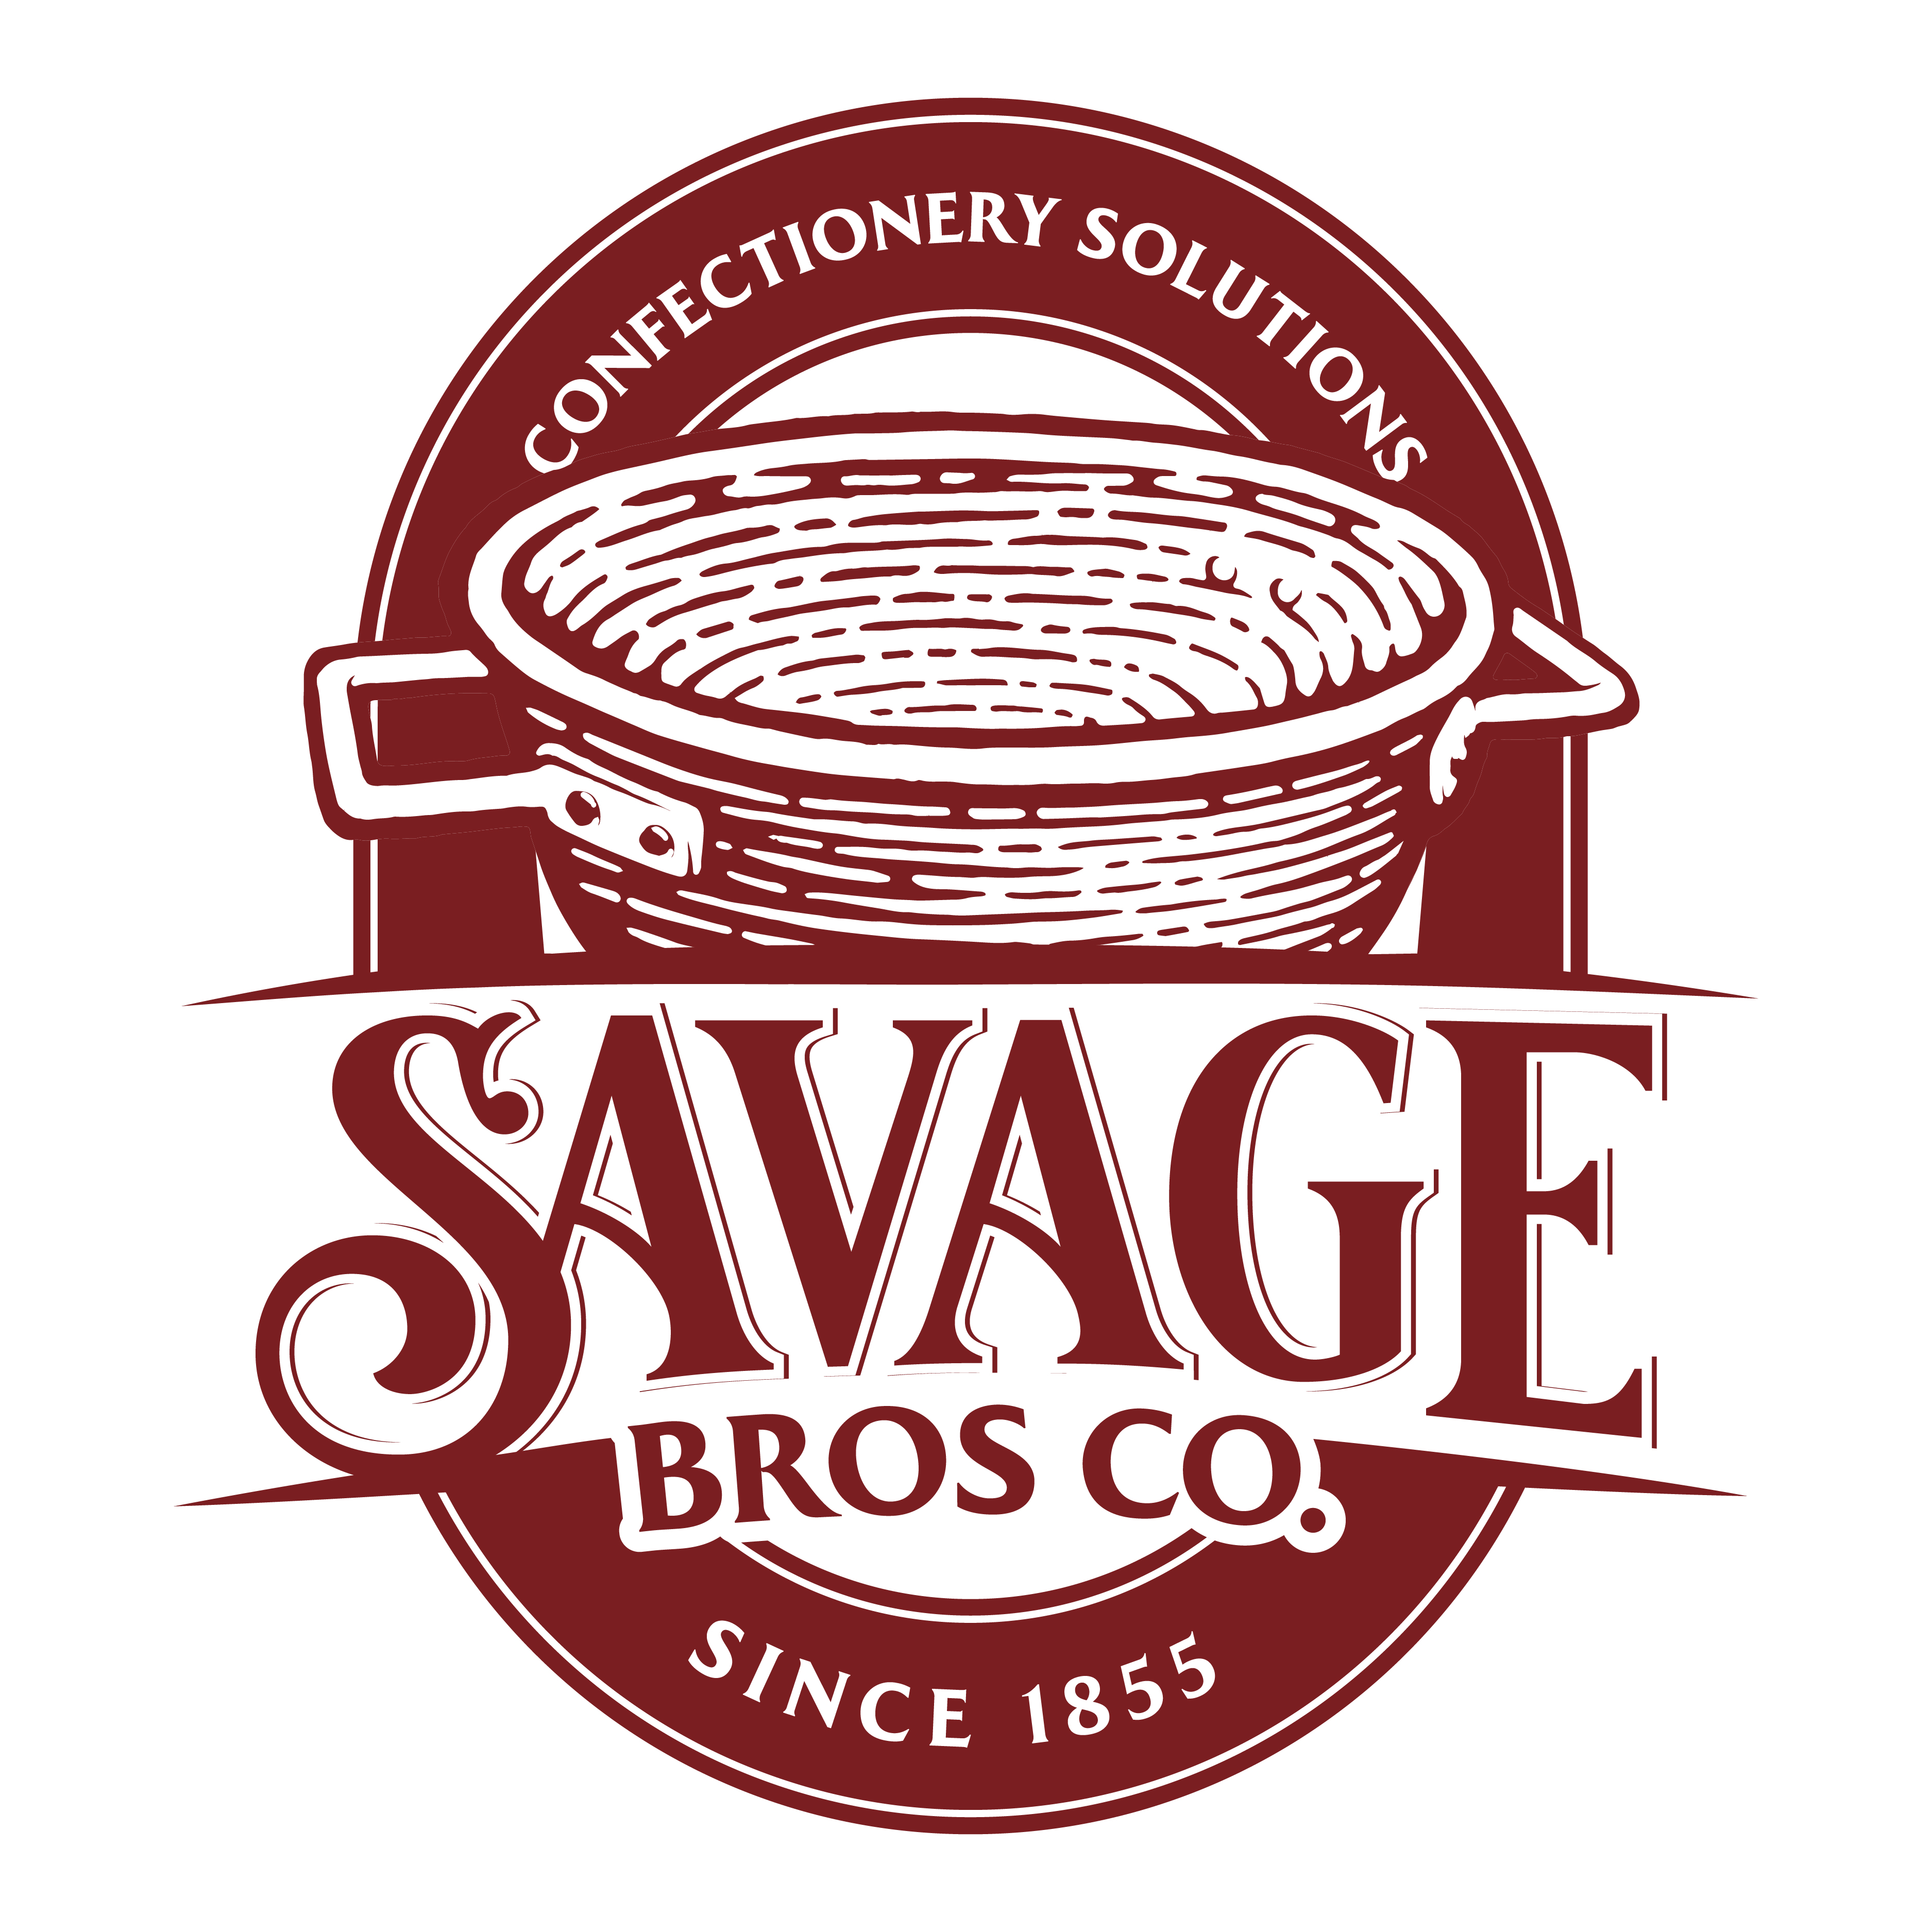 Savage Bros. Badge 1 logo design by logo designer Detour Graphic Design Inc.  for your inspiration and for the worlds largest logo competition